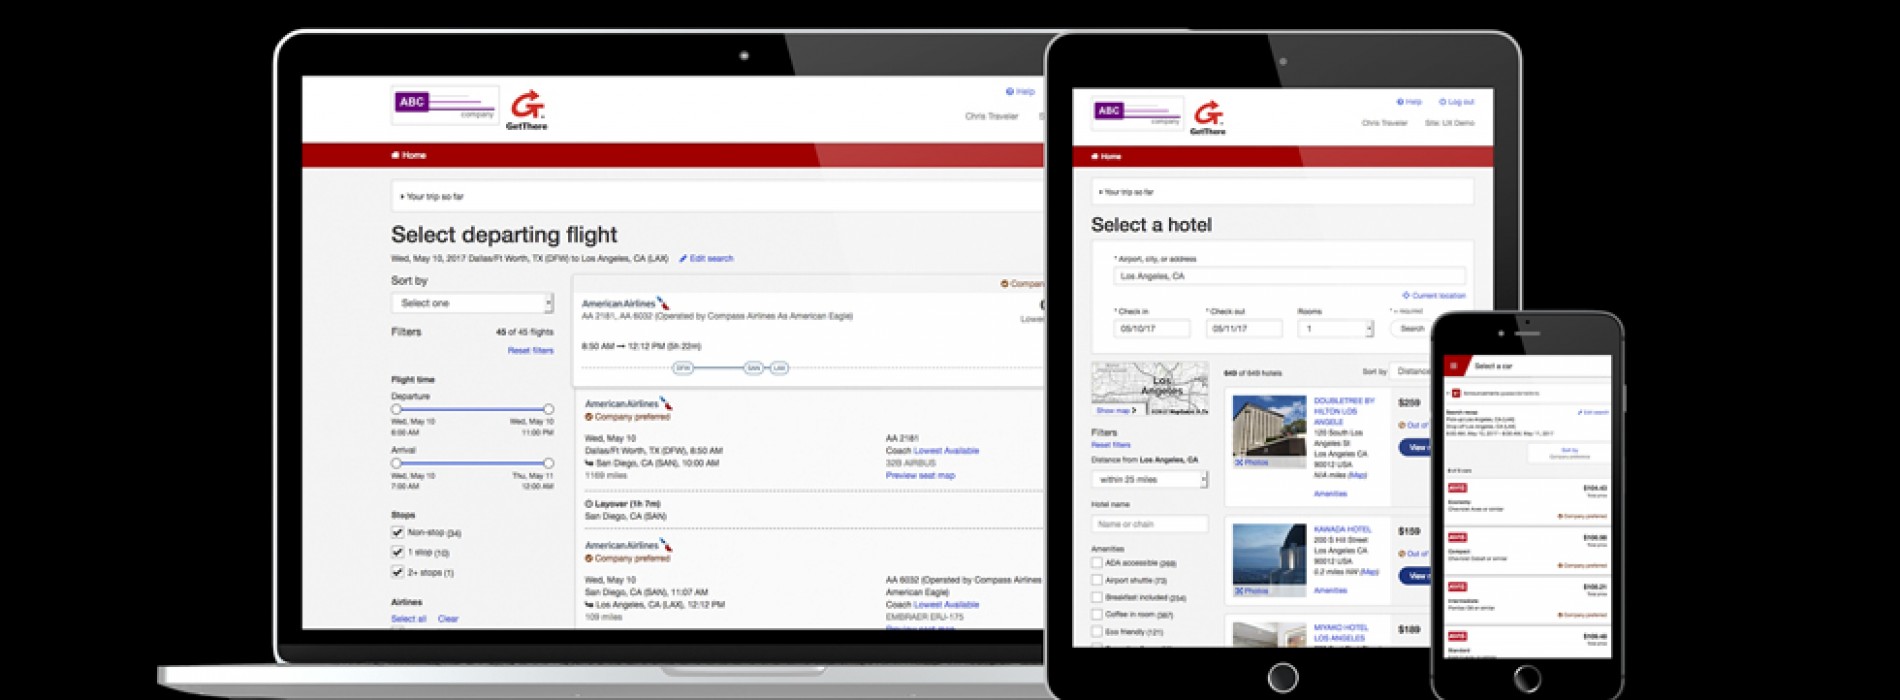 Sabre revamps GetThere to help business travelers get there with enhanced features and mobile empowered tools